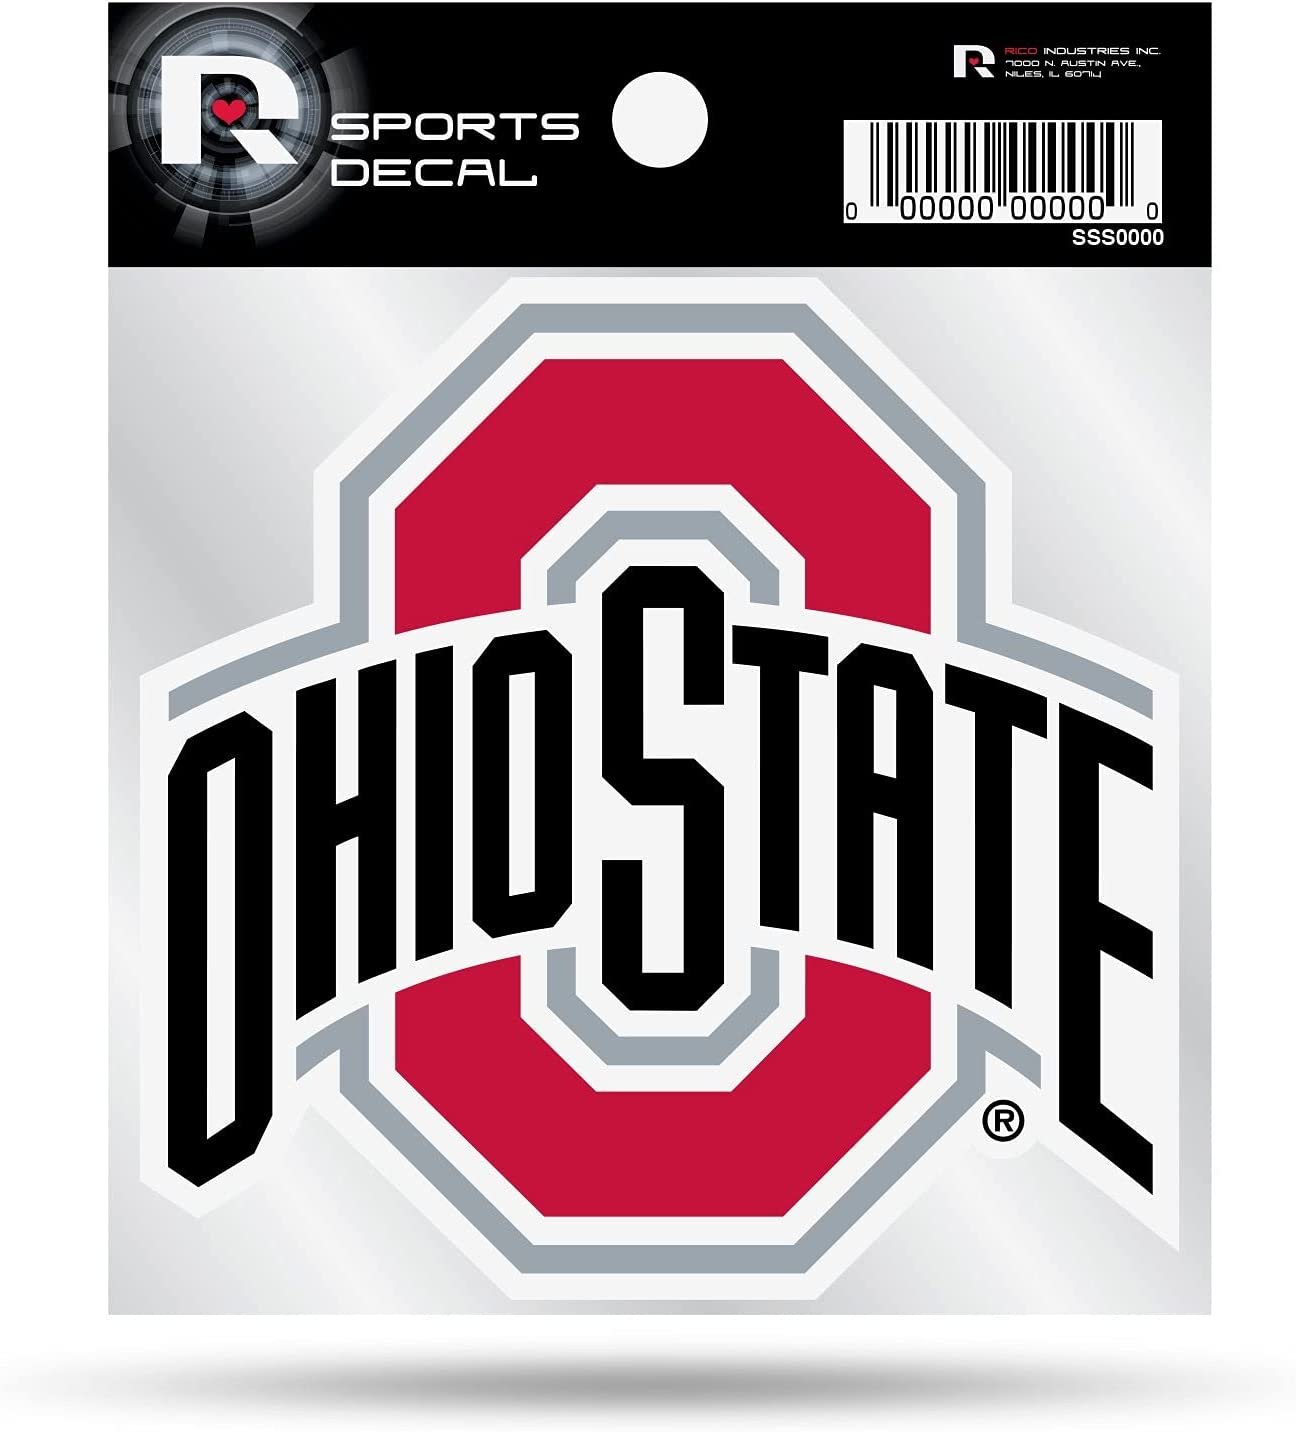 Ohio State University Buckeyes 4x4 Inch Die Cut Decal Sticker, Primary Logo, Clear Backing